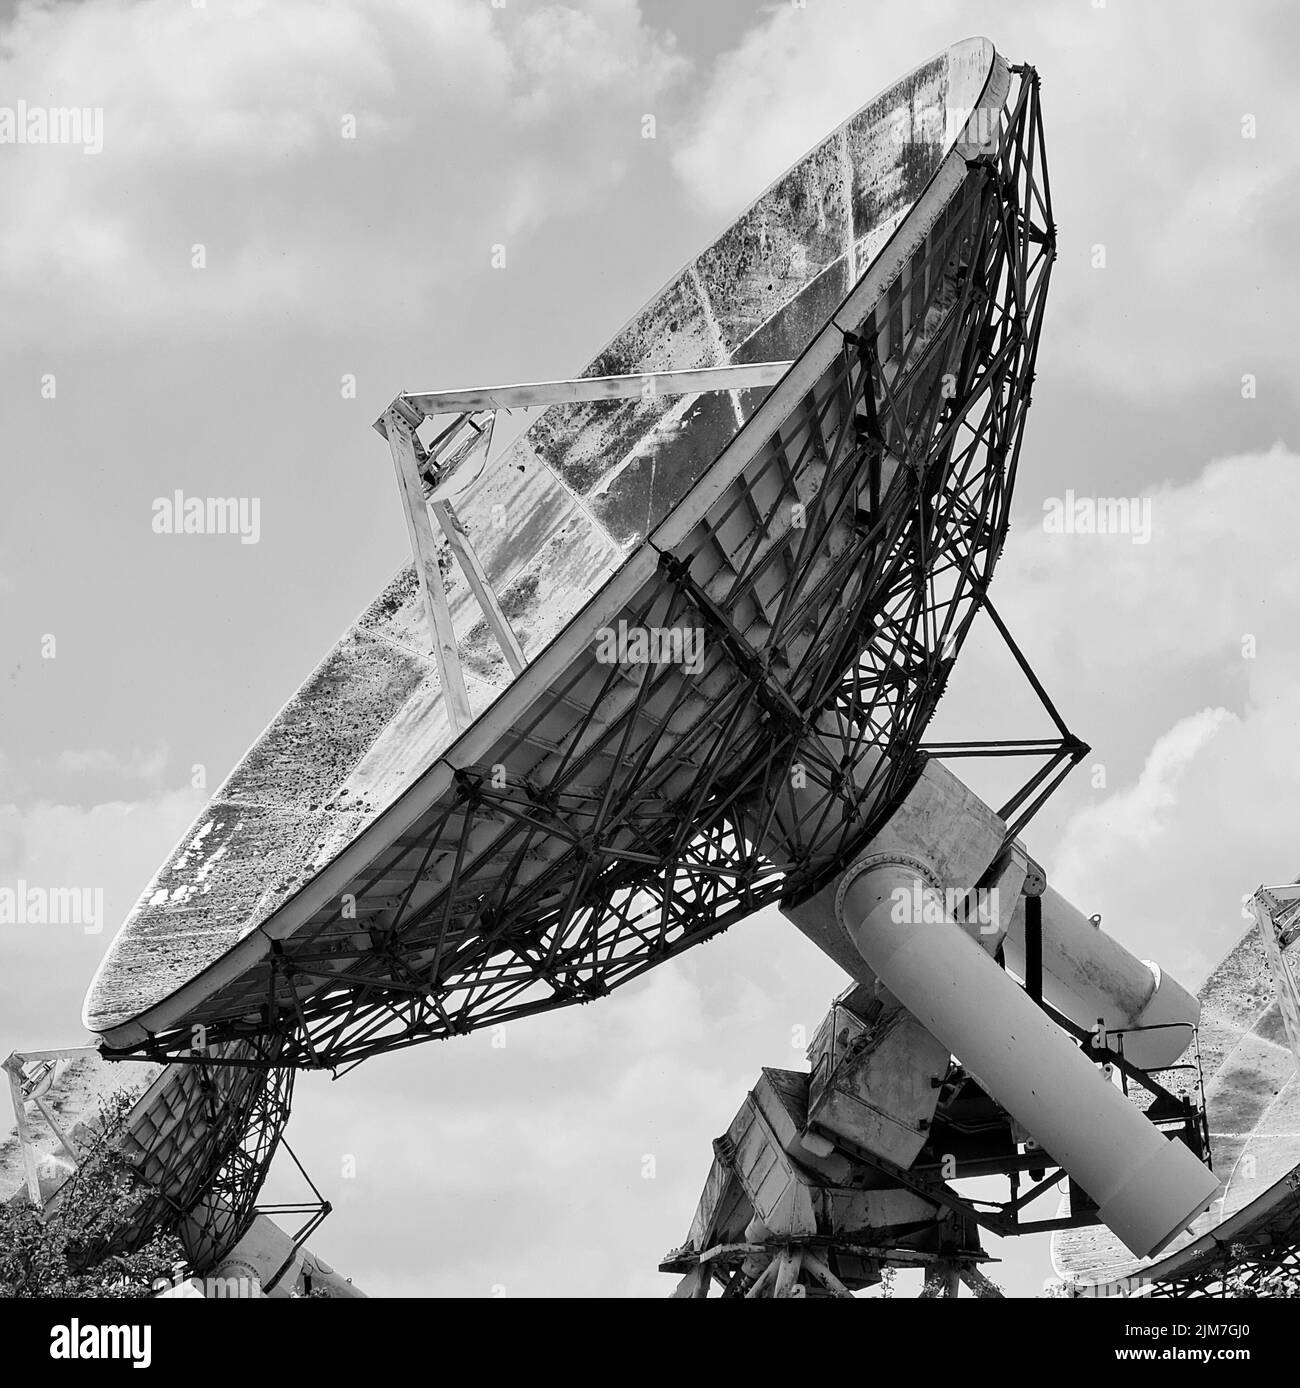 A radio astronomy observatory telescope covered in dirt points at 45 degrees into the sky. Stock Photo